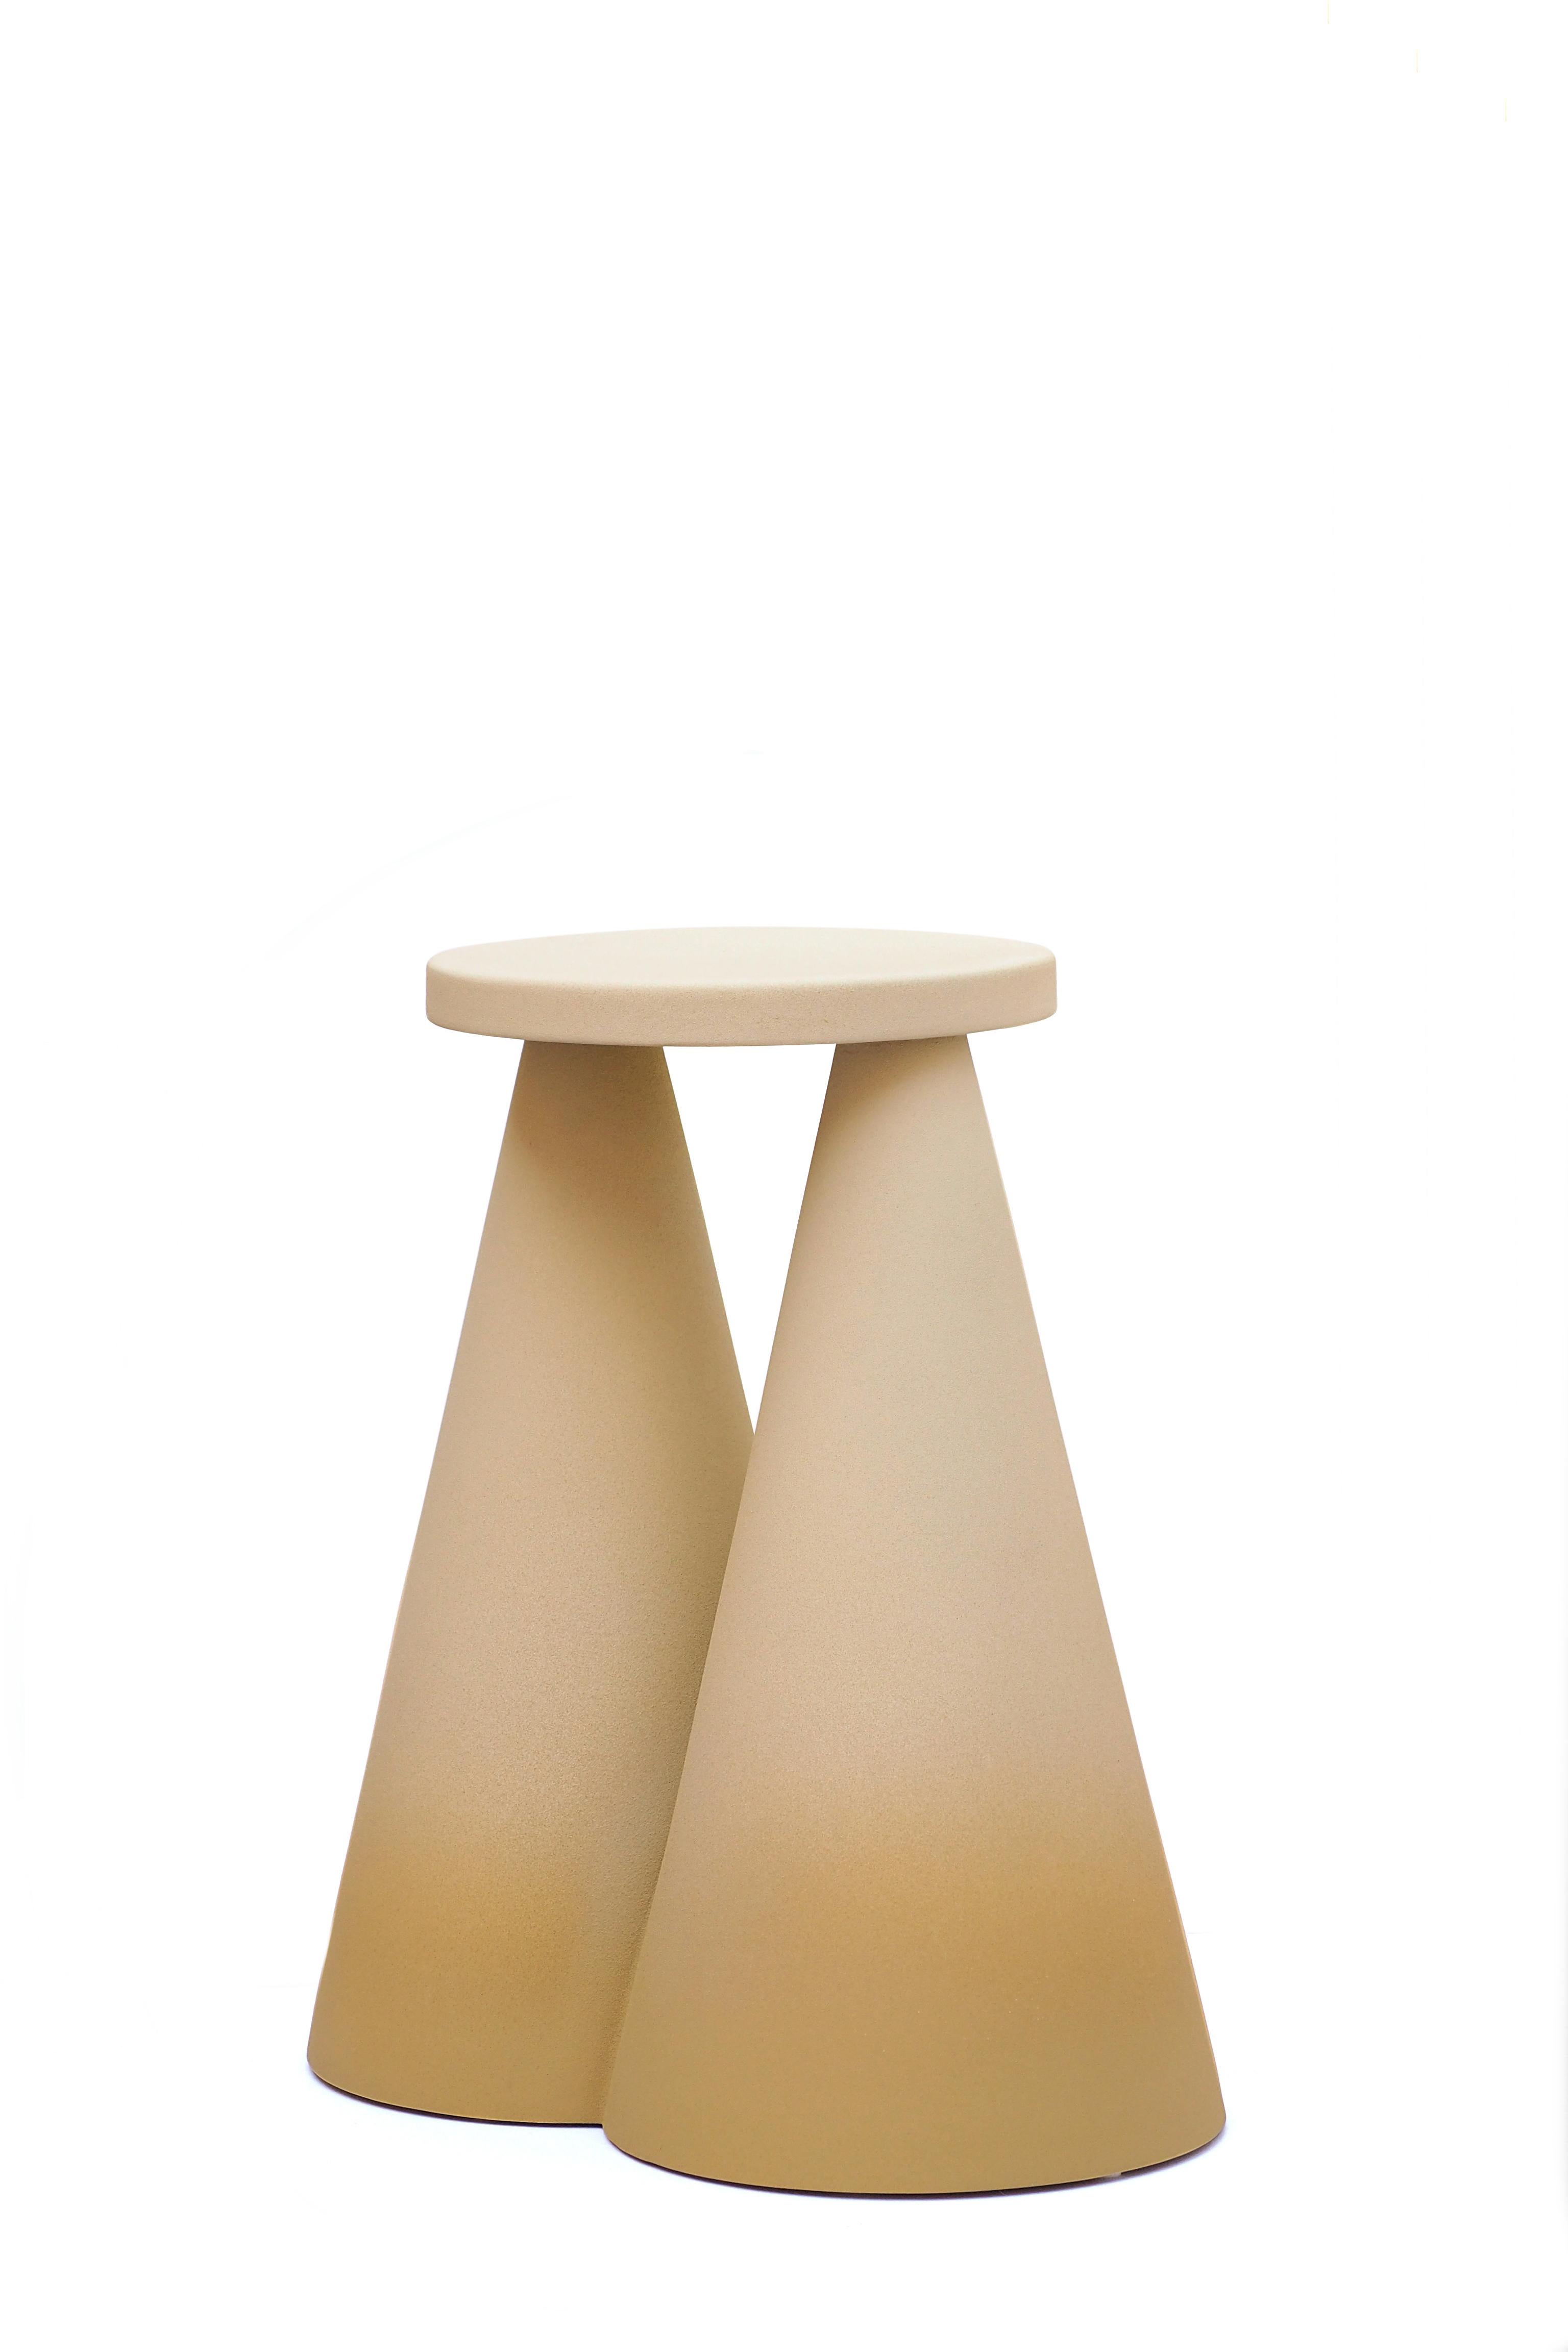 Honey Isola Side Table by Cara Davide
Dimensions: D 25 x W 43 x H 45 cm 
Materials: Ceramic /Rough touch finishing.
Also available in colors: Honey and Purple. Please contact us for more information. 

Isola side table is completely made in